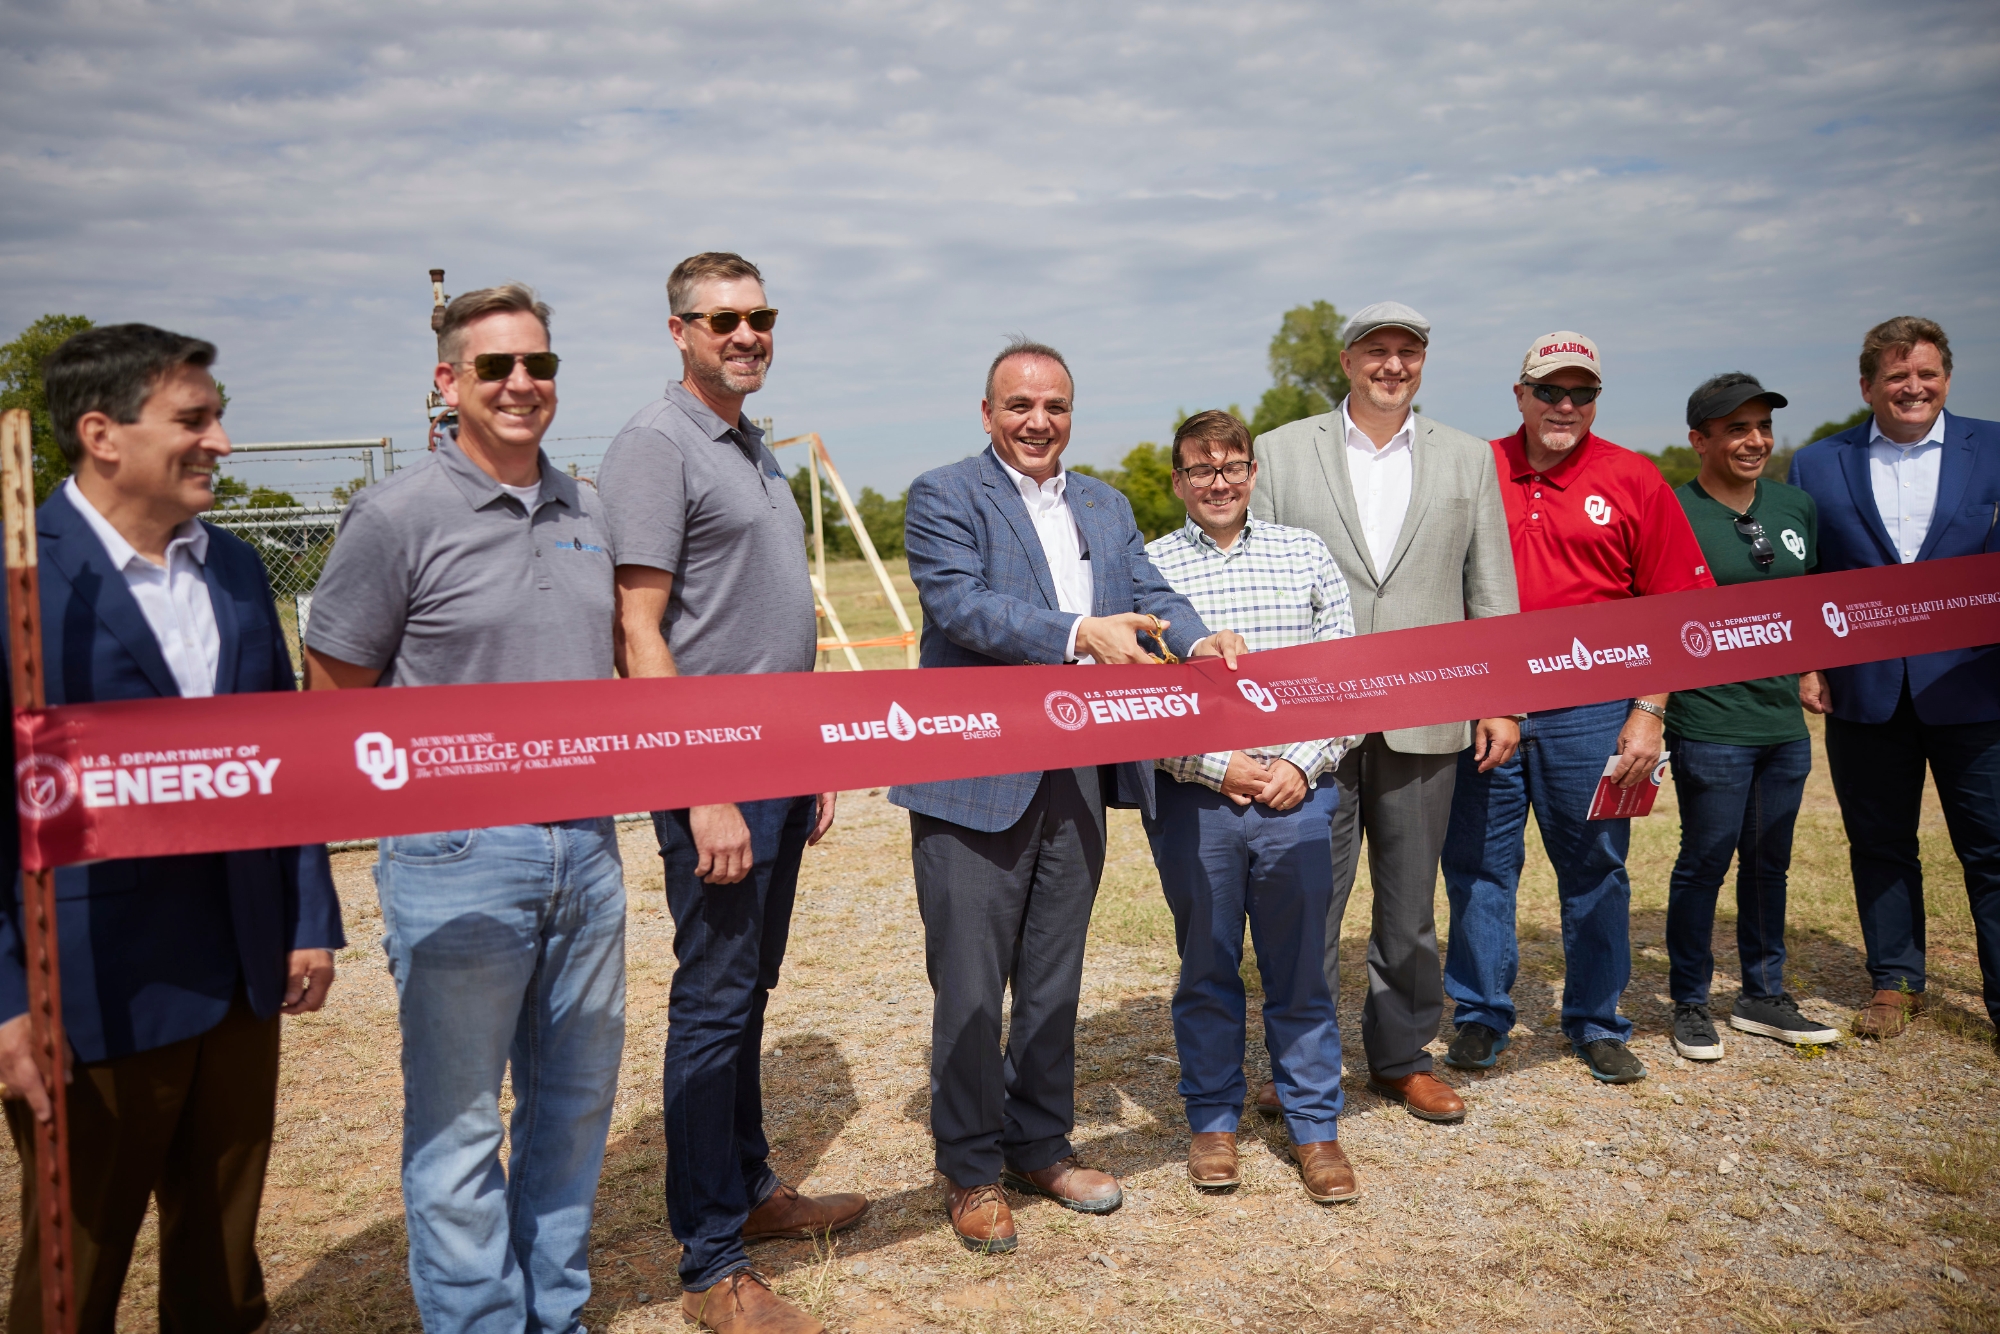 Project stakeholders and university leadership cut the ceremonial ribbon in front of a future geothermal well.